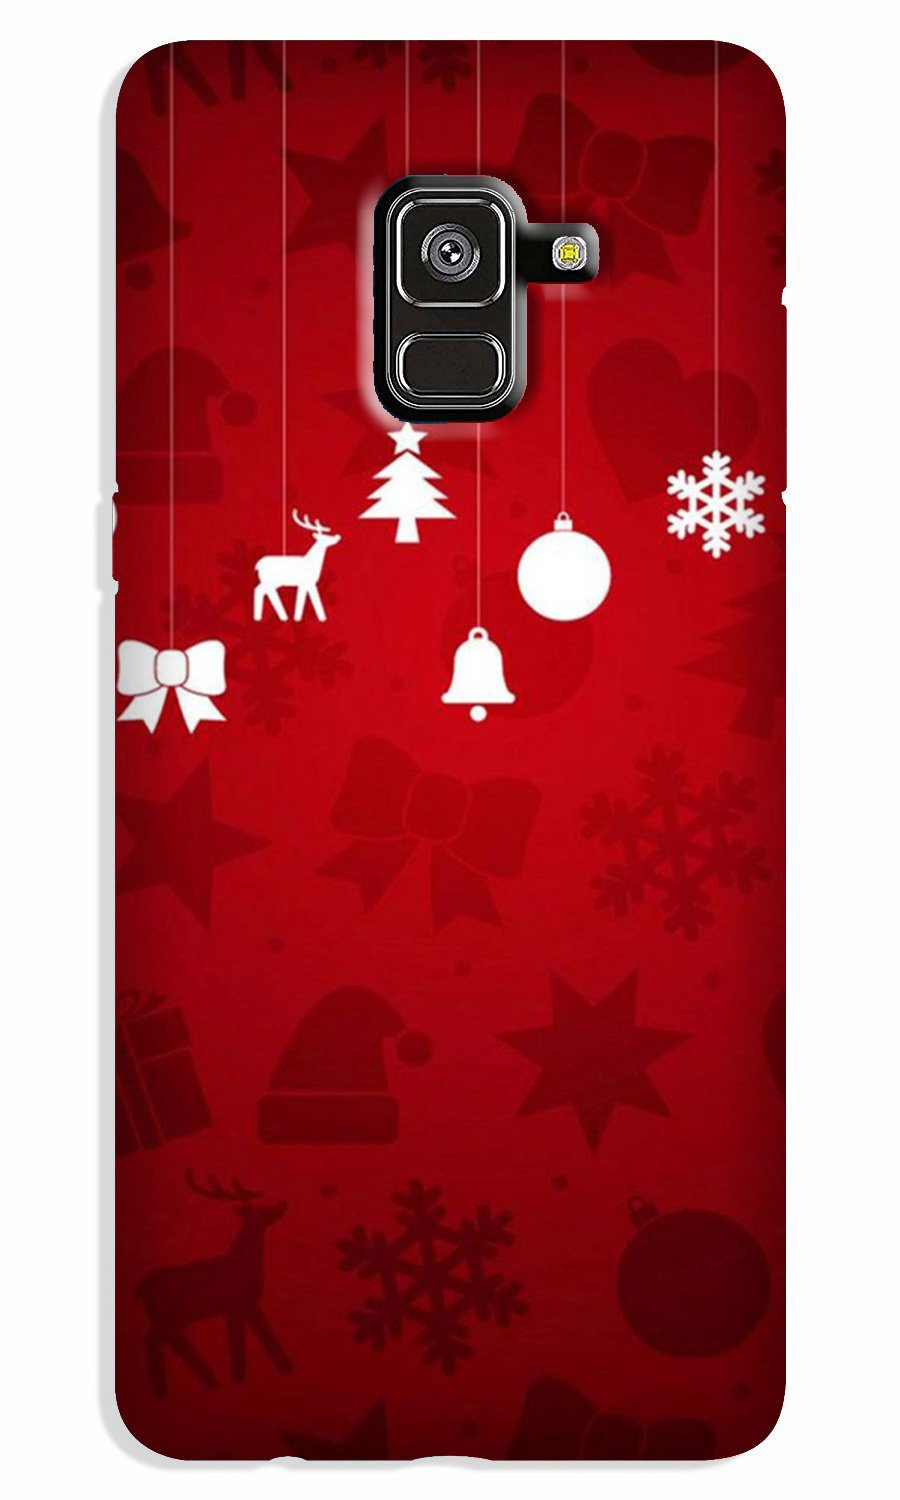 Christmas Case for Galaxy A8 Plus